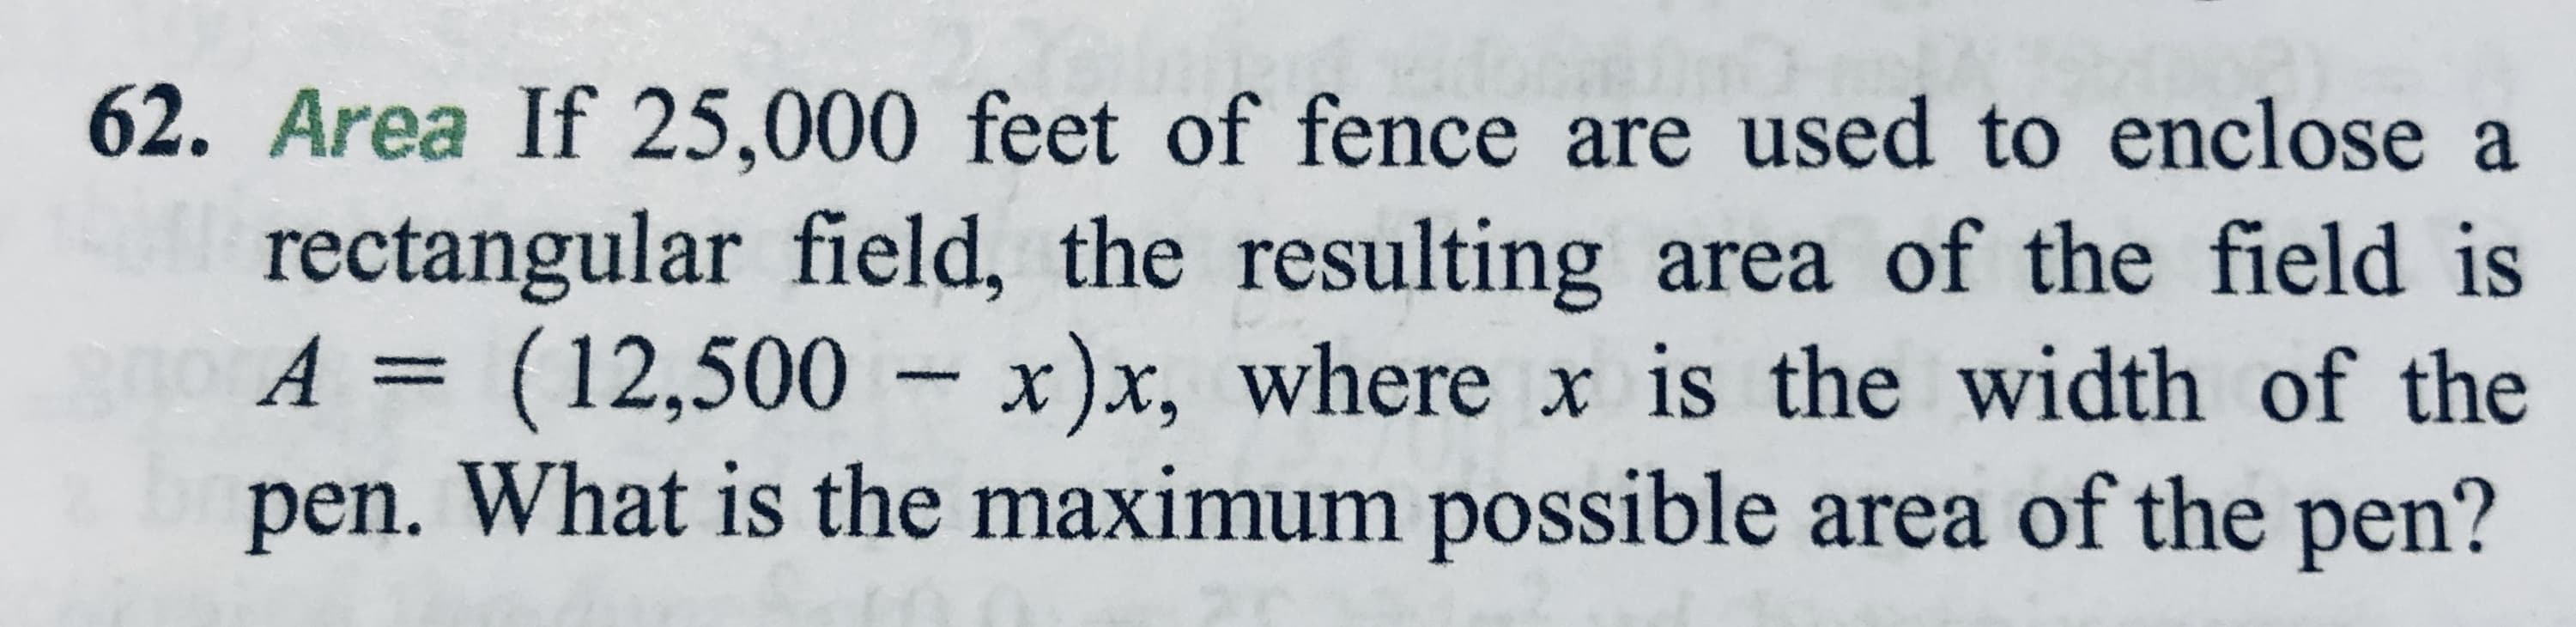 62. Area If 25,000 feet of fence are used to enclose a
rectangular field, the resulting area of the field is
(12,500 - x)x, where x is the width of the
A 3D
pen. What is the maximum possible area of the pen?
